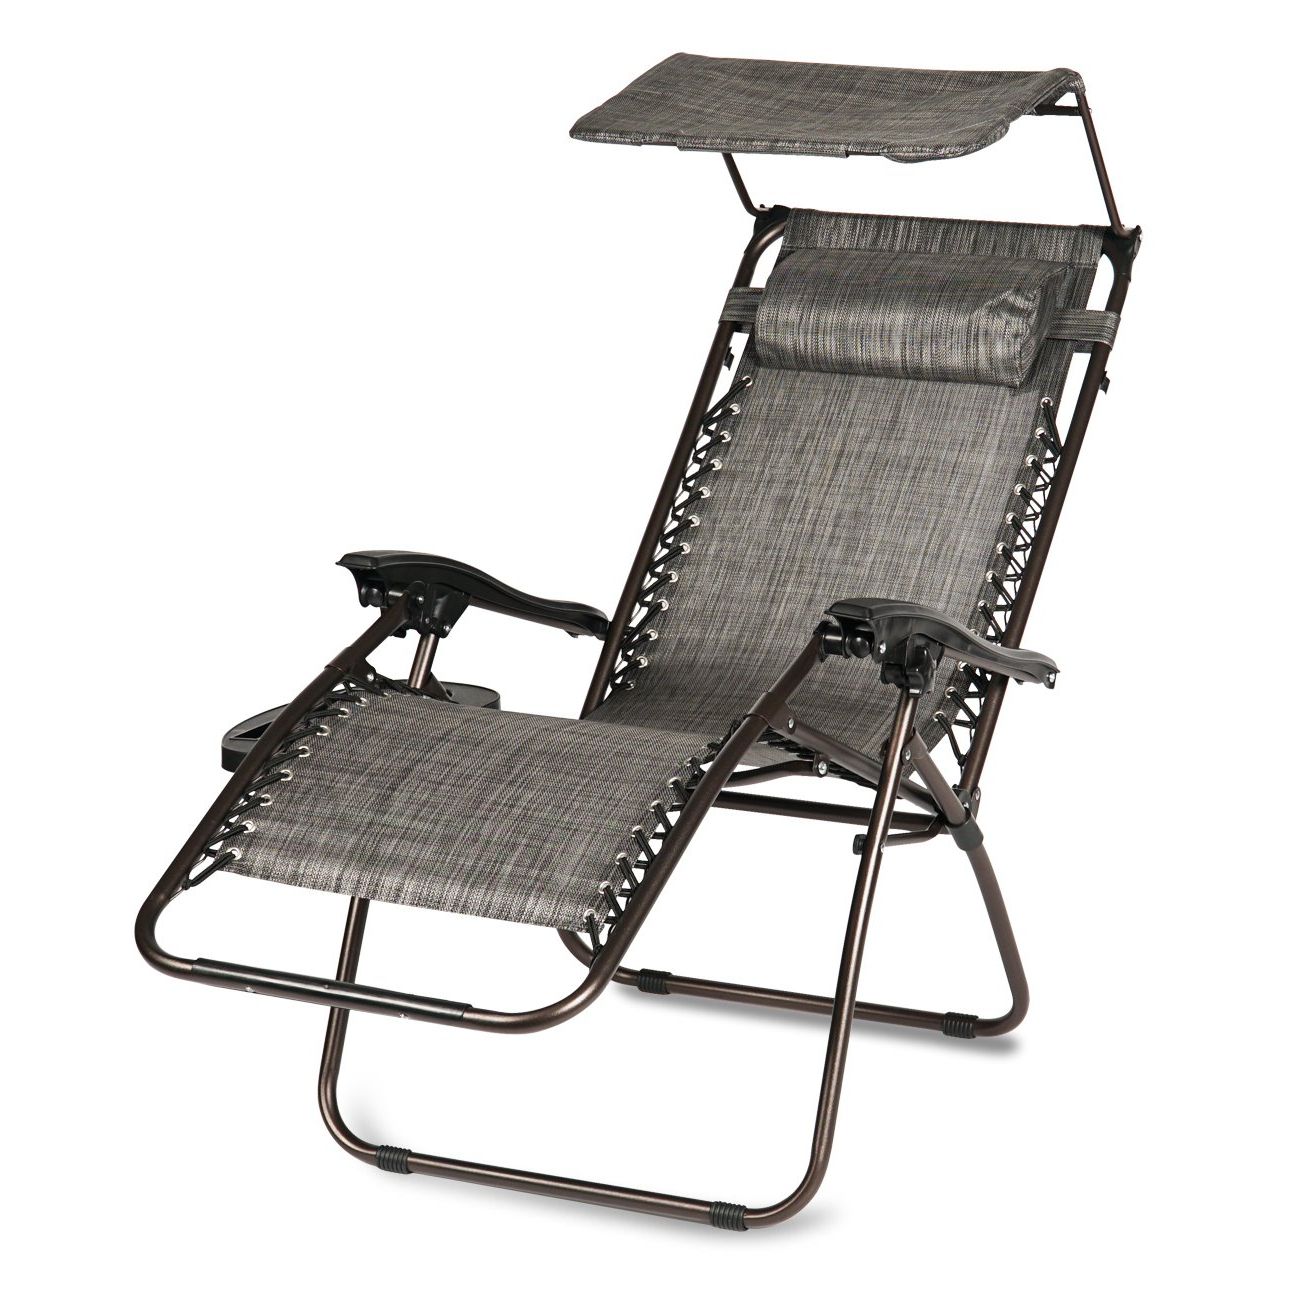 Cheap Ute Tray Canopy, Find Ute Tray Canopy Deals On Line At Regarding Best And Newest Garden Oversized Chairs With Sunshade And Drink Tray (View 20 of 25)